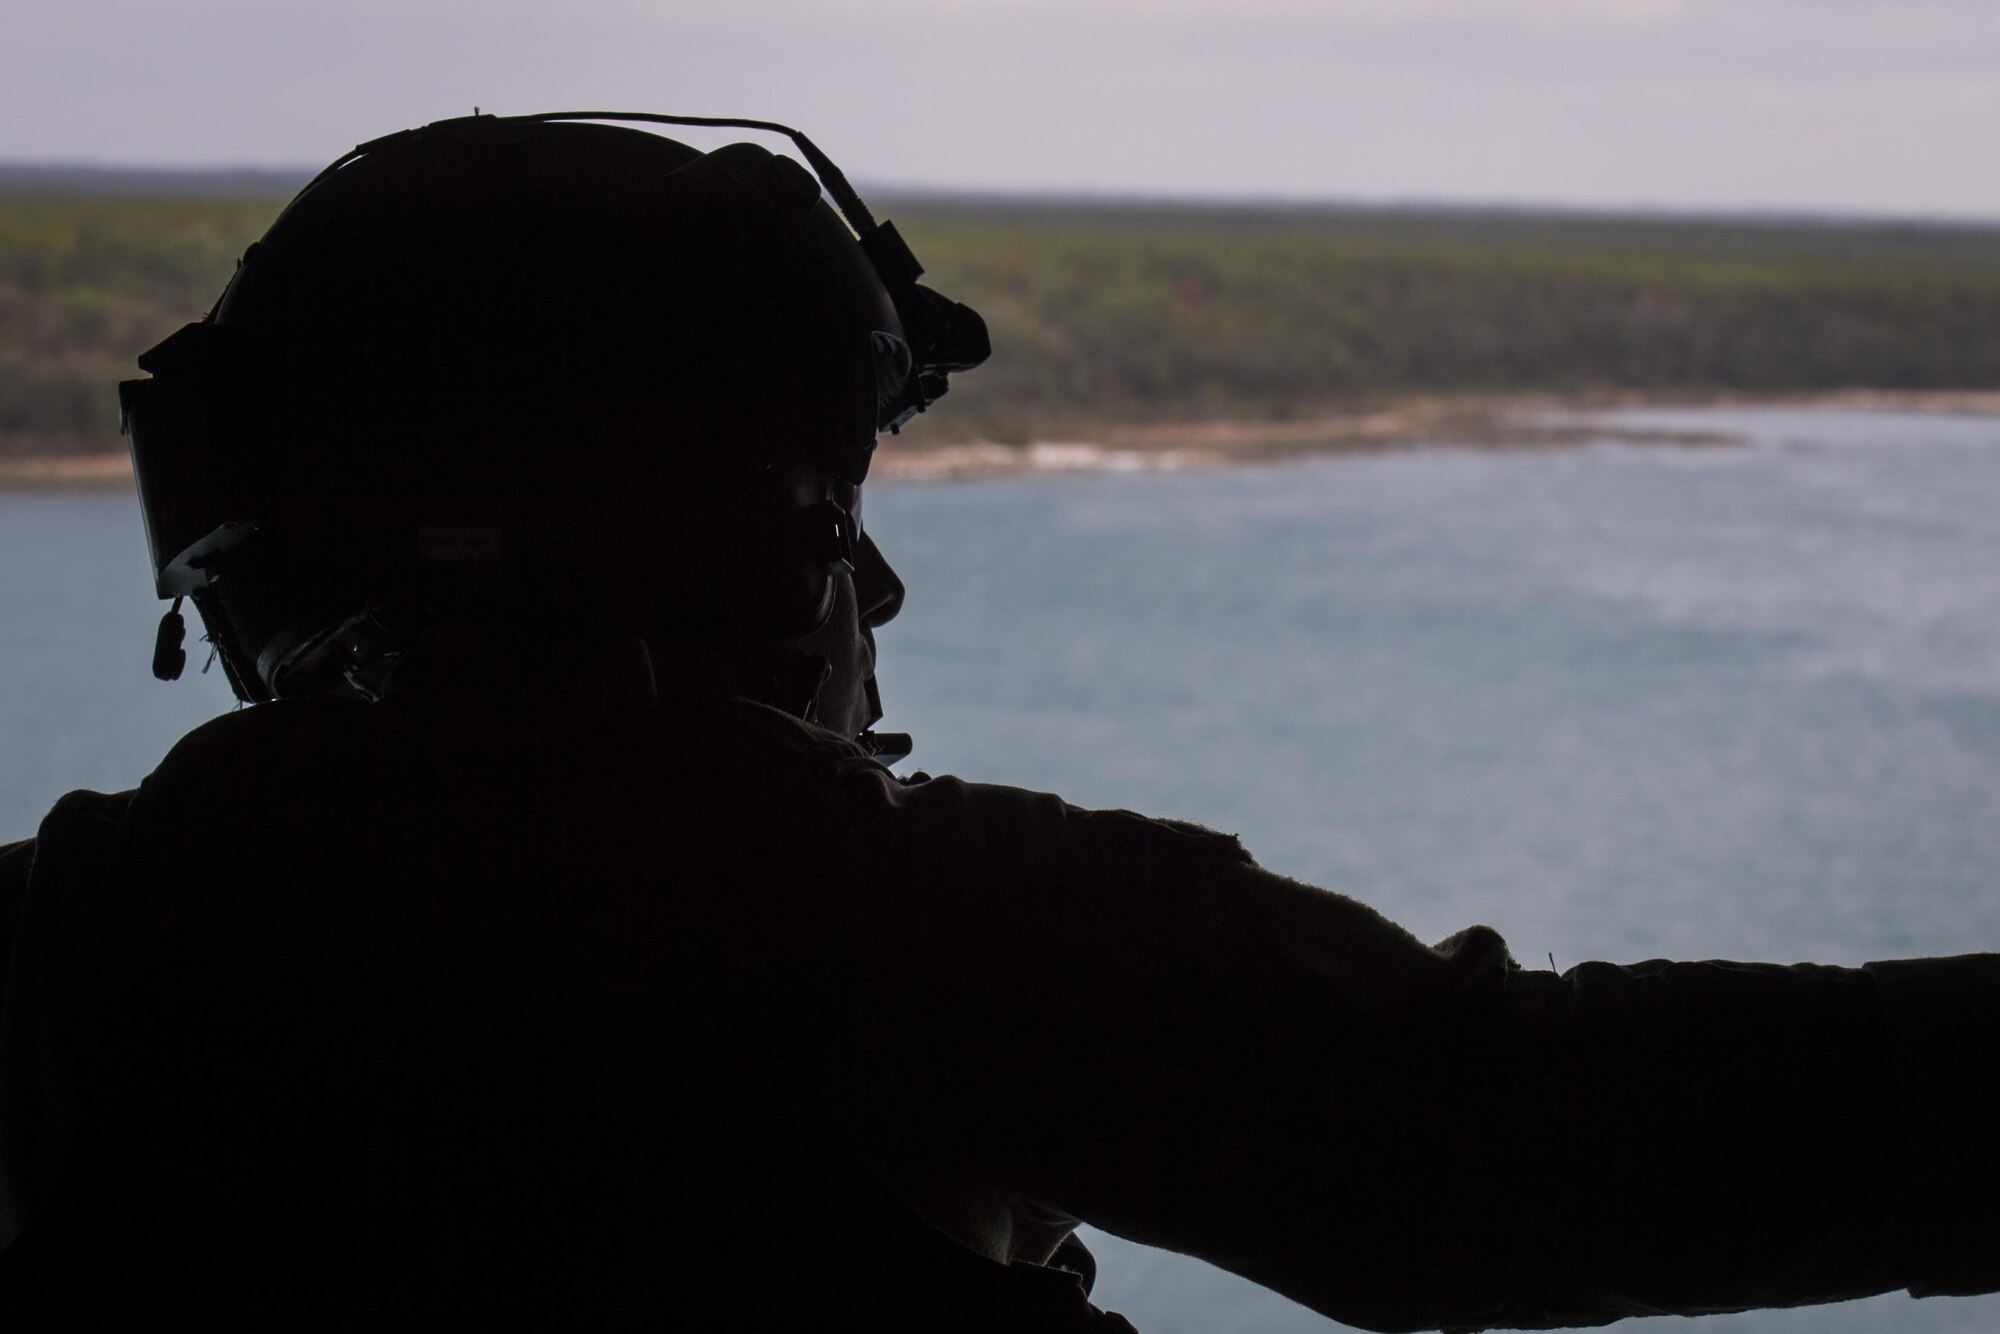 A flight engineer with the 8th Special Operations Squadron looks out at the Eglin Range, Fla., Nov. 30, 2016. Air Commandos with the 8th SOS conduct water training to maintain relevance for tomorrow and ensure readiness for global special operations. (U.S. Air Force photo by Airman 1st Class Joseph Pick)